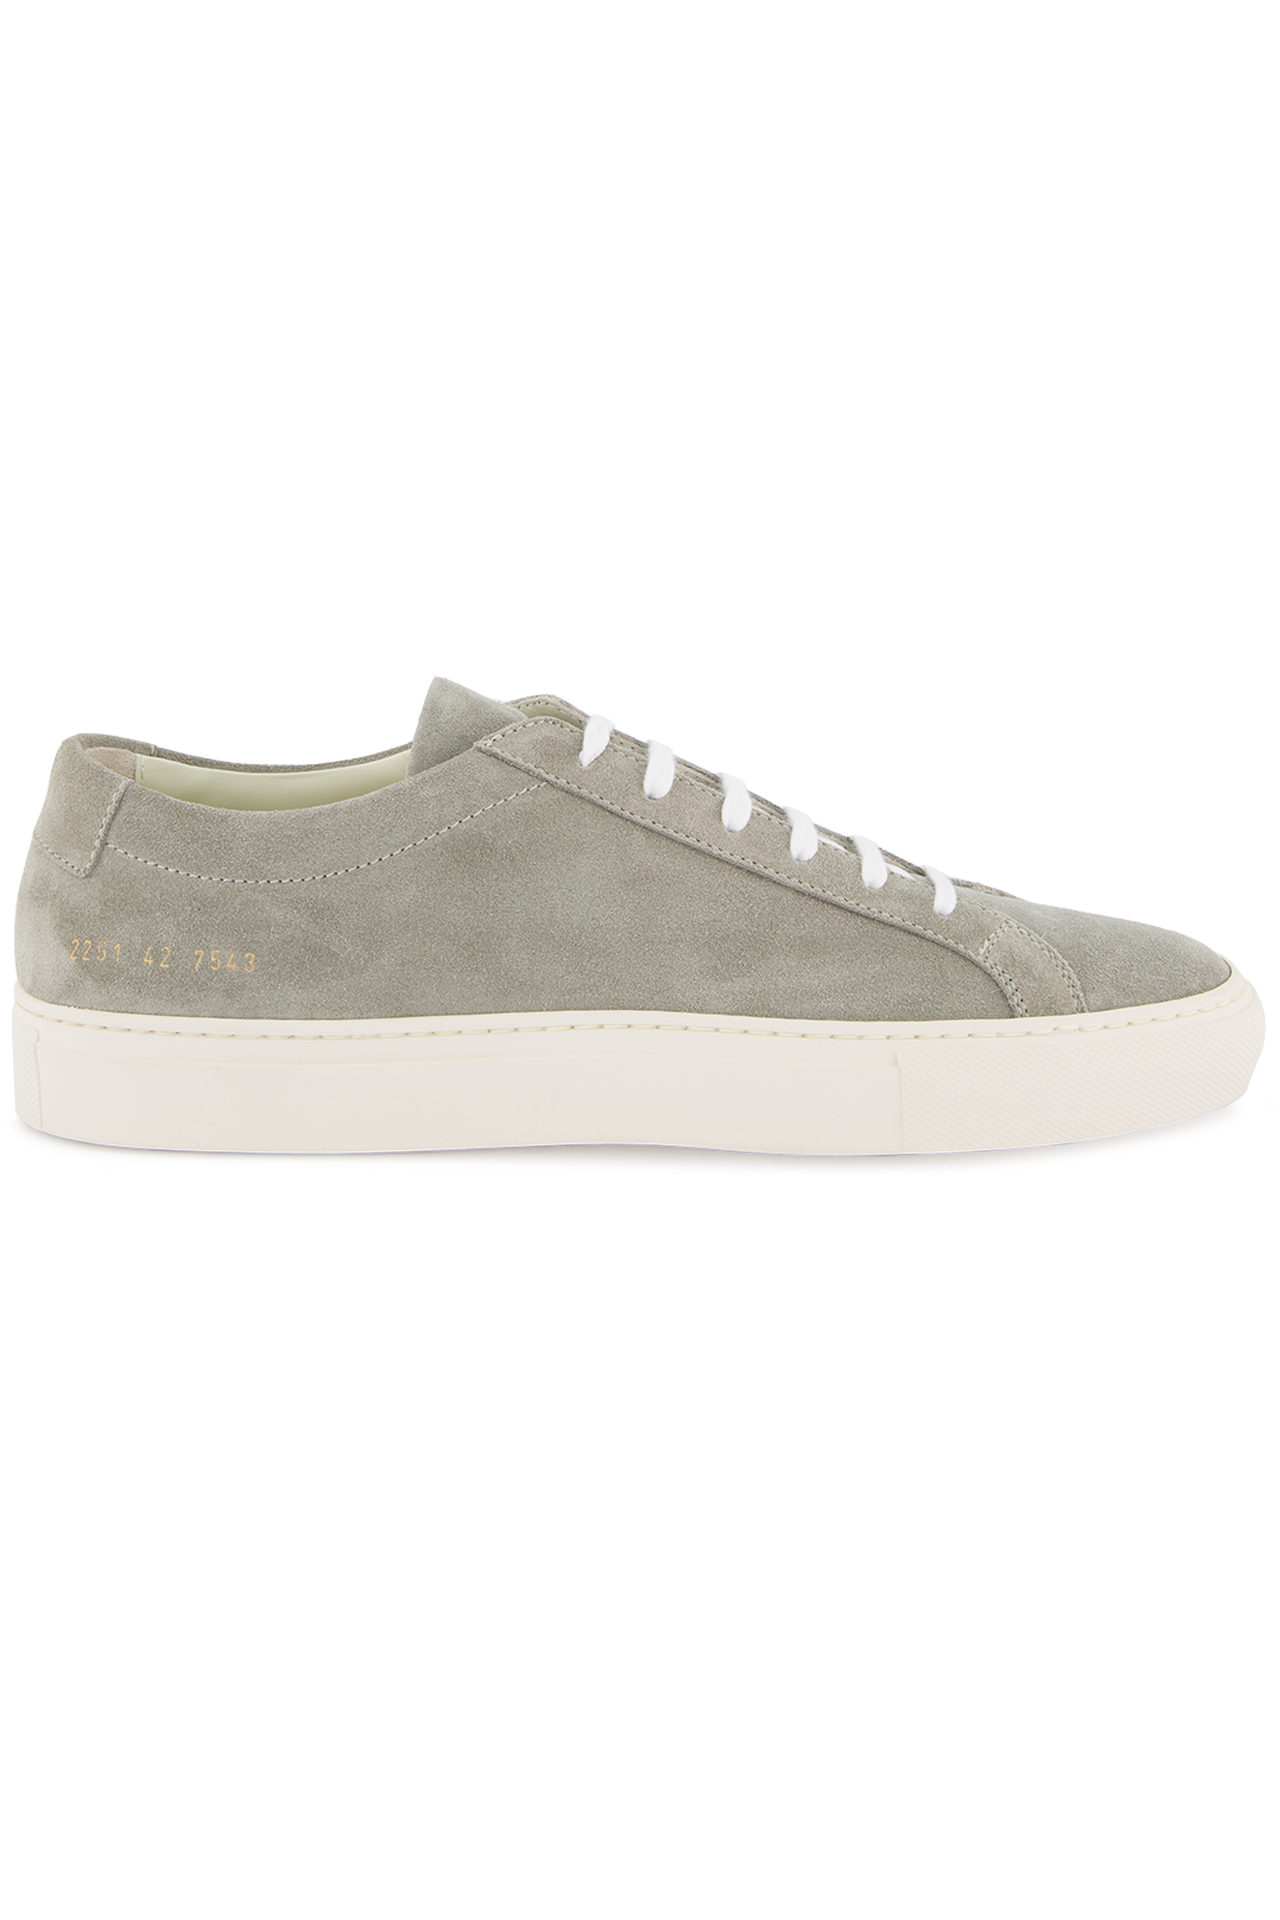 mens grey common projects